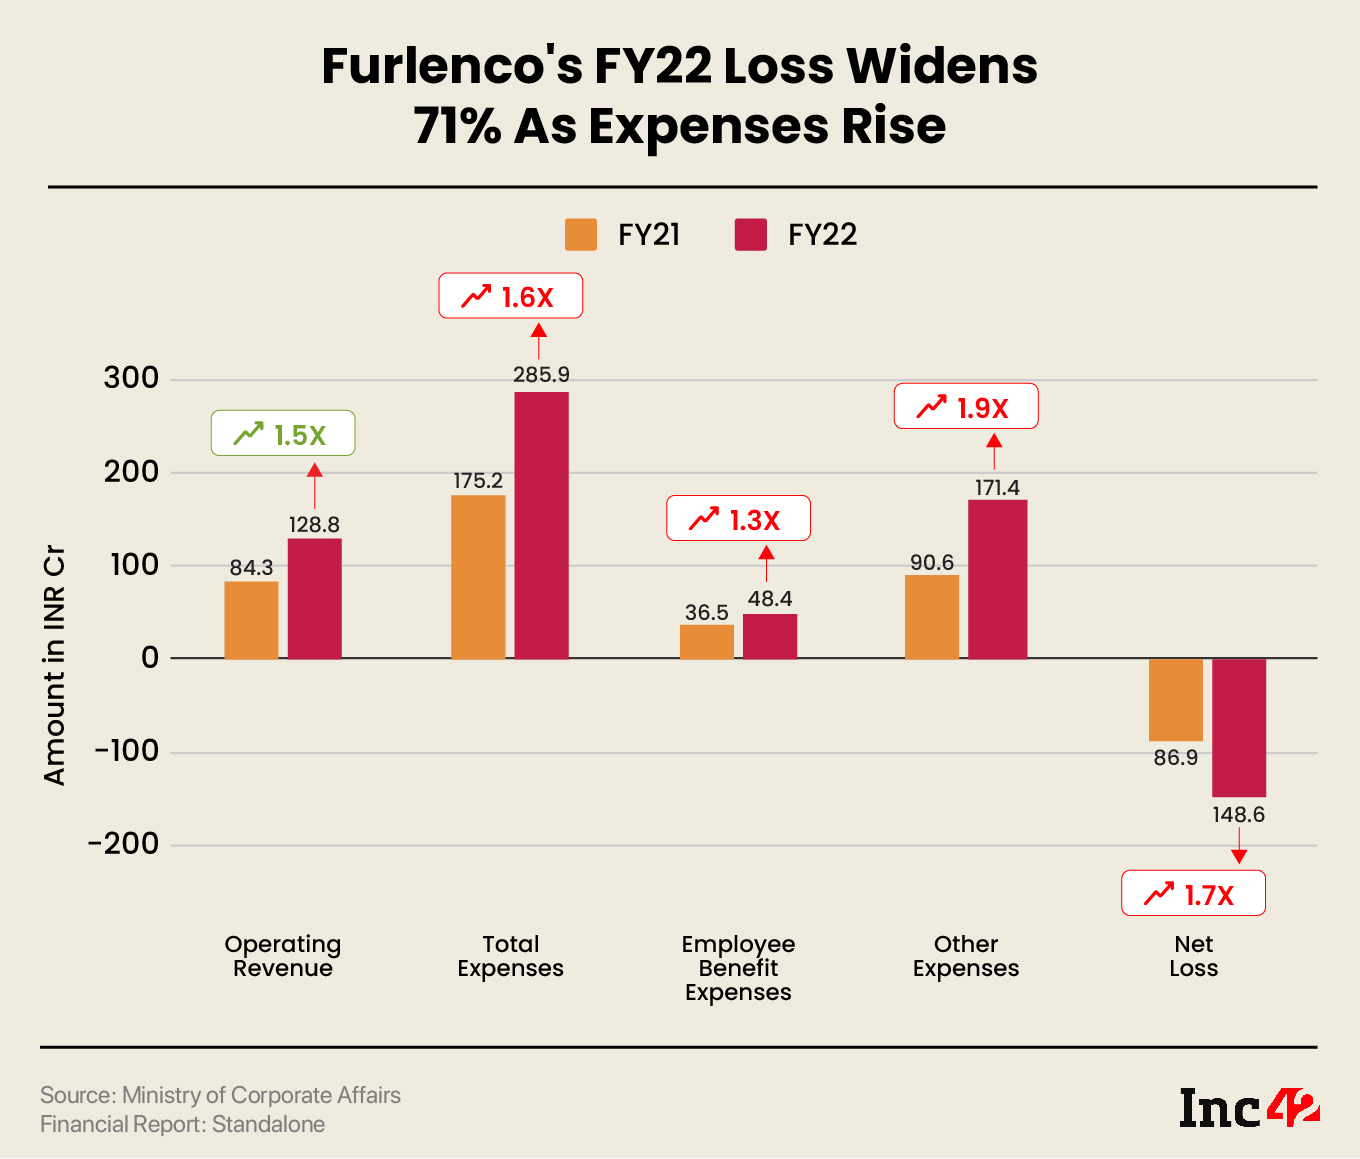 Furlenco’s FY22 Loss Widens 71% YoY To INR 149 Cr, Operating Revenue Up 1.5X